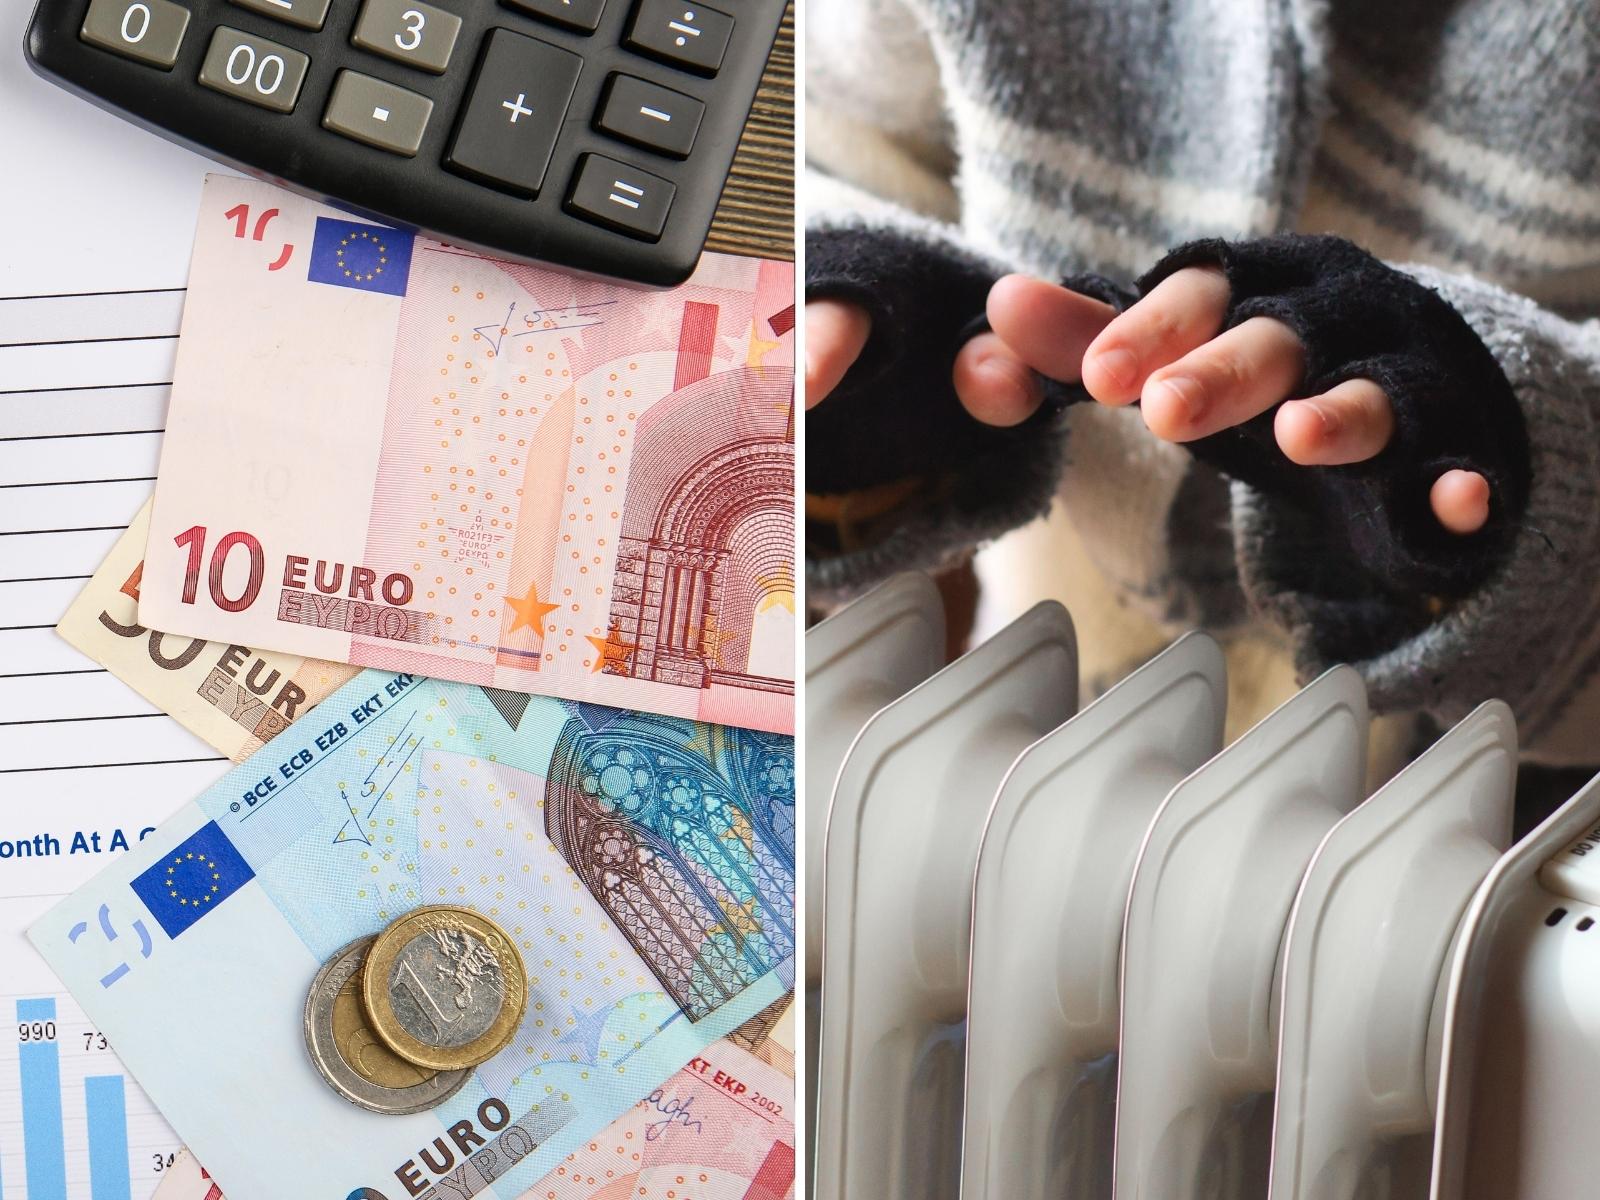 A split-screen of a Euros and a person warming themselves on a heater.